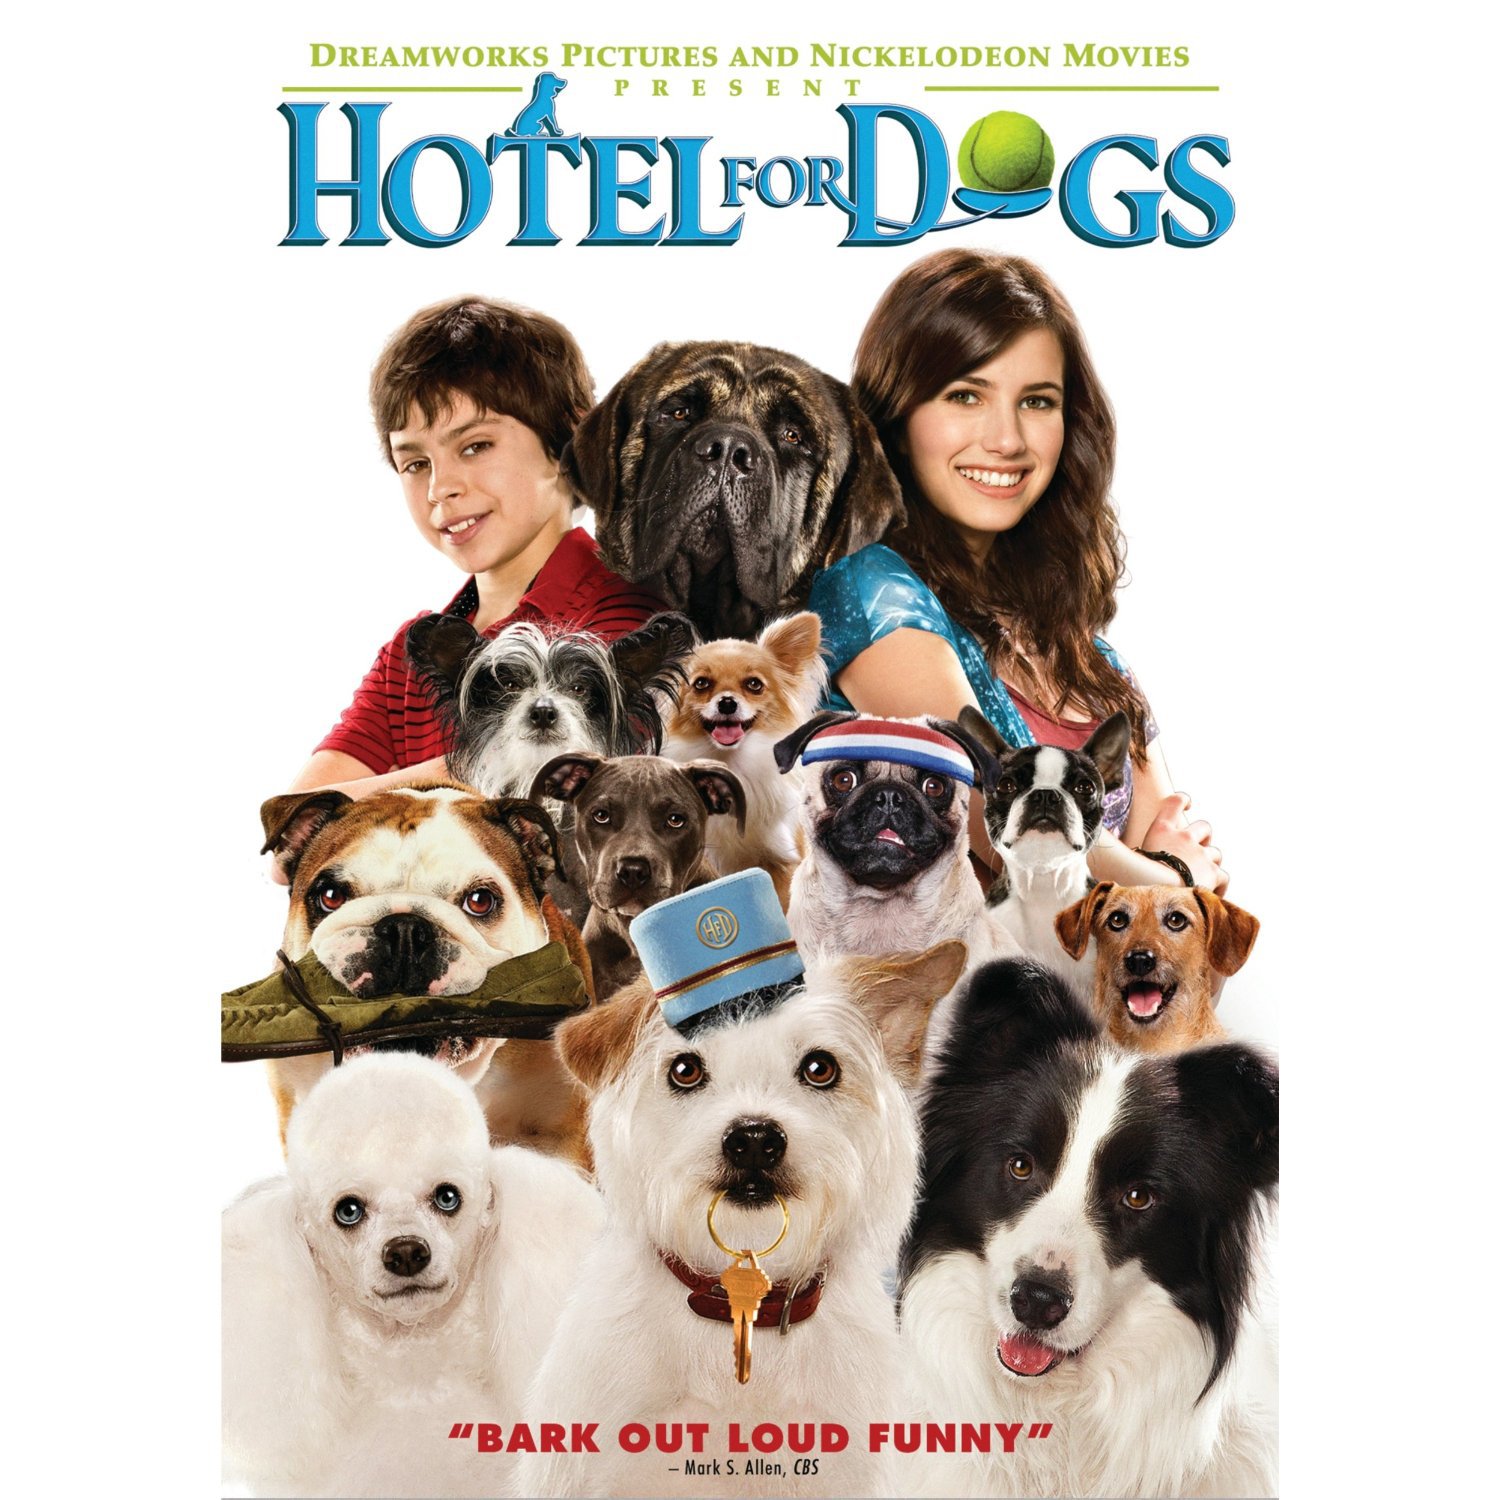 Hotel for Dogs